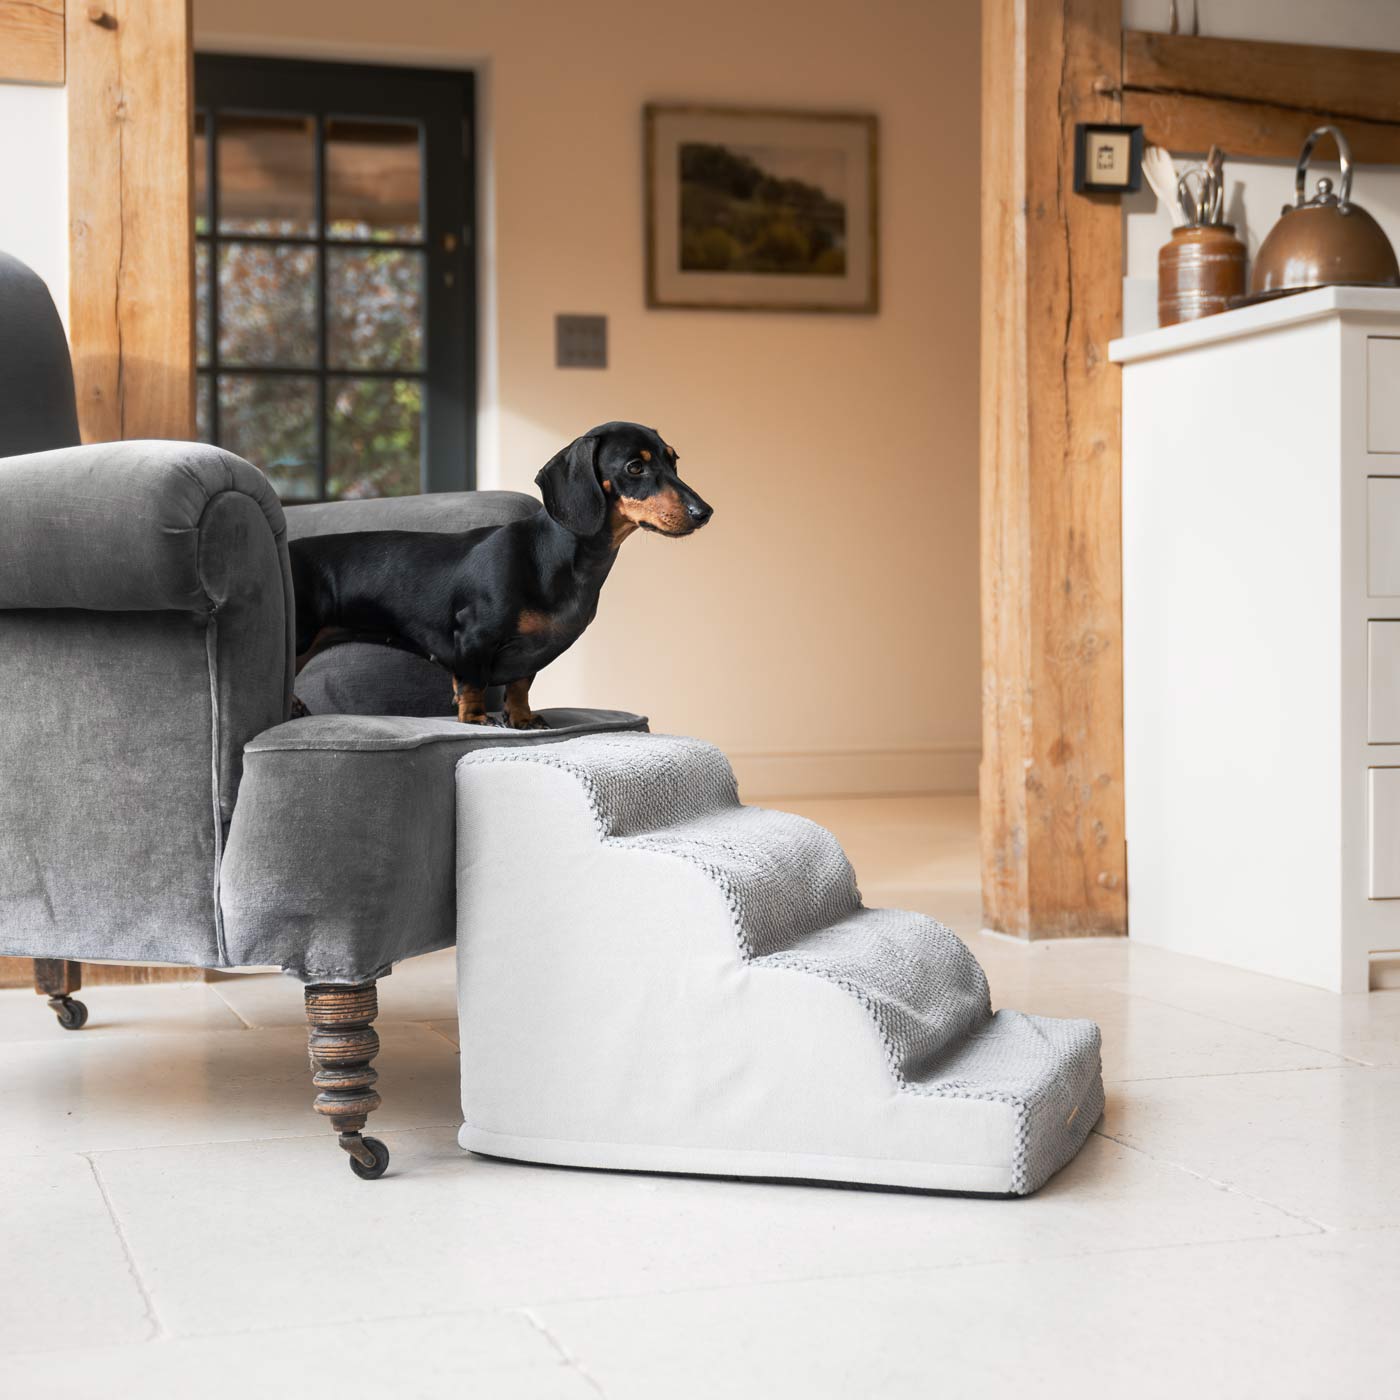 Provide Your Elderly, Young or Injured Pet with The Perfect Pet Furniture Steps, Our Luxury Cloud Pet Steps in Stunning Dove Gray Is the Ideal Choice for Dogs & Cats of All Ages! Pet Steps & Stairs Available Now at Lords & Labradors US